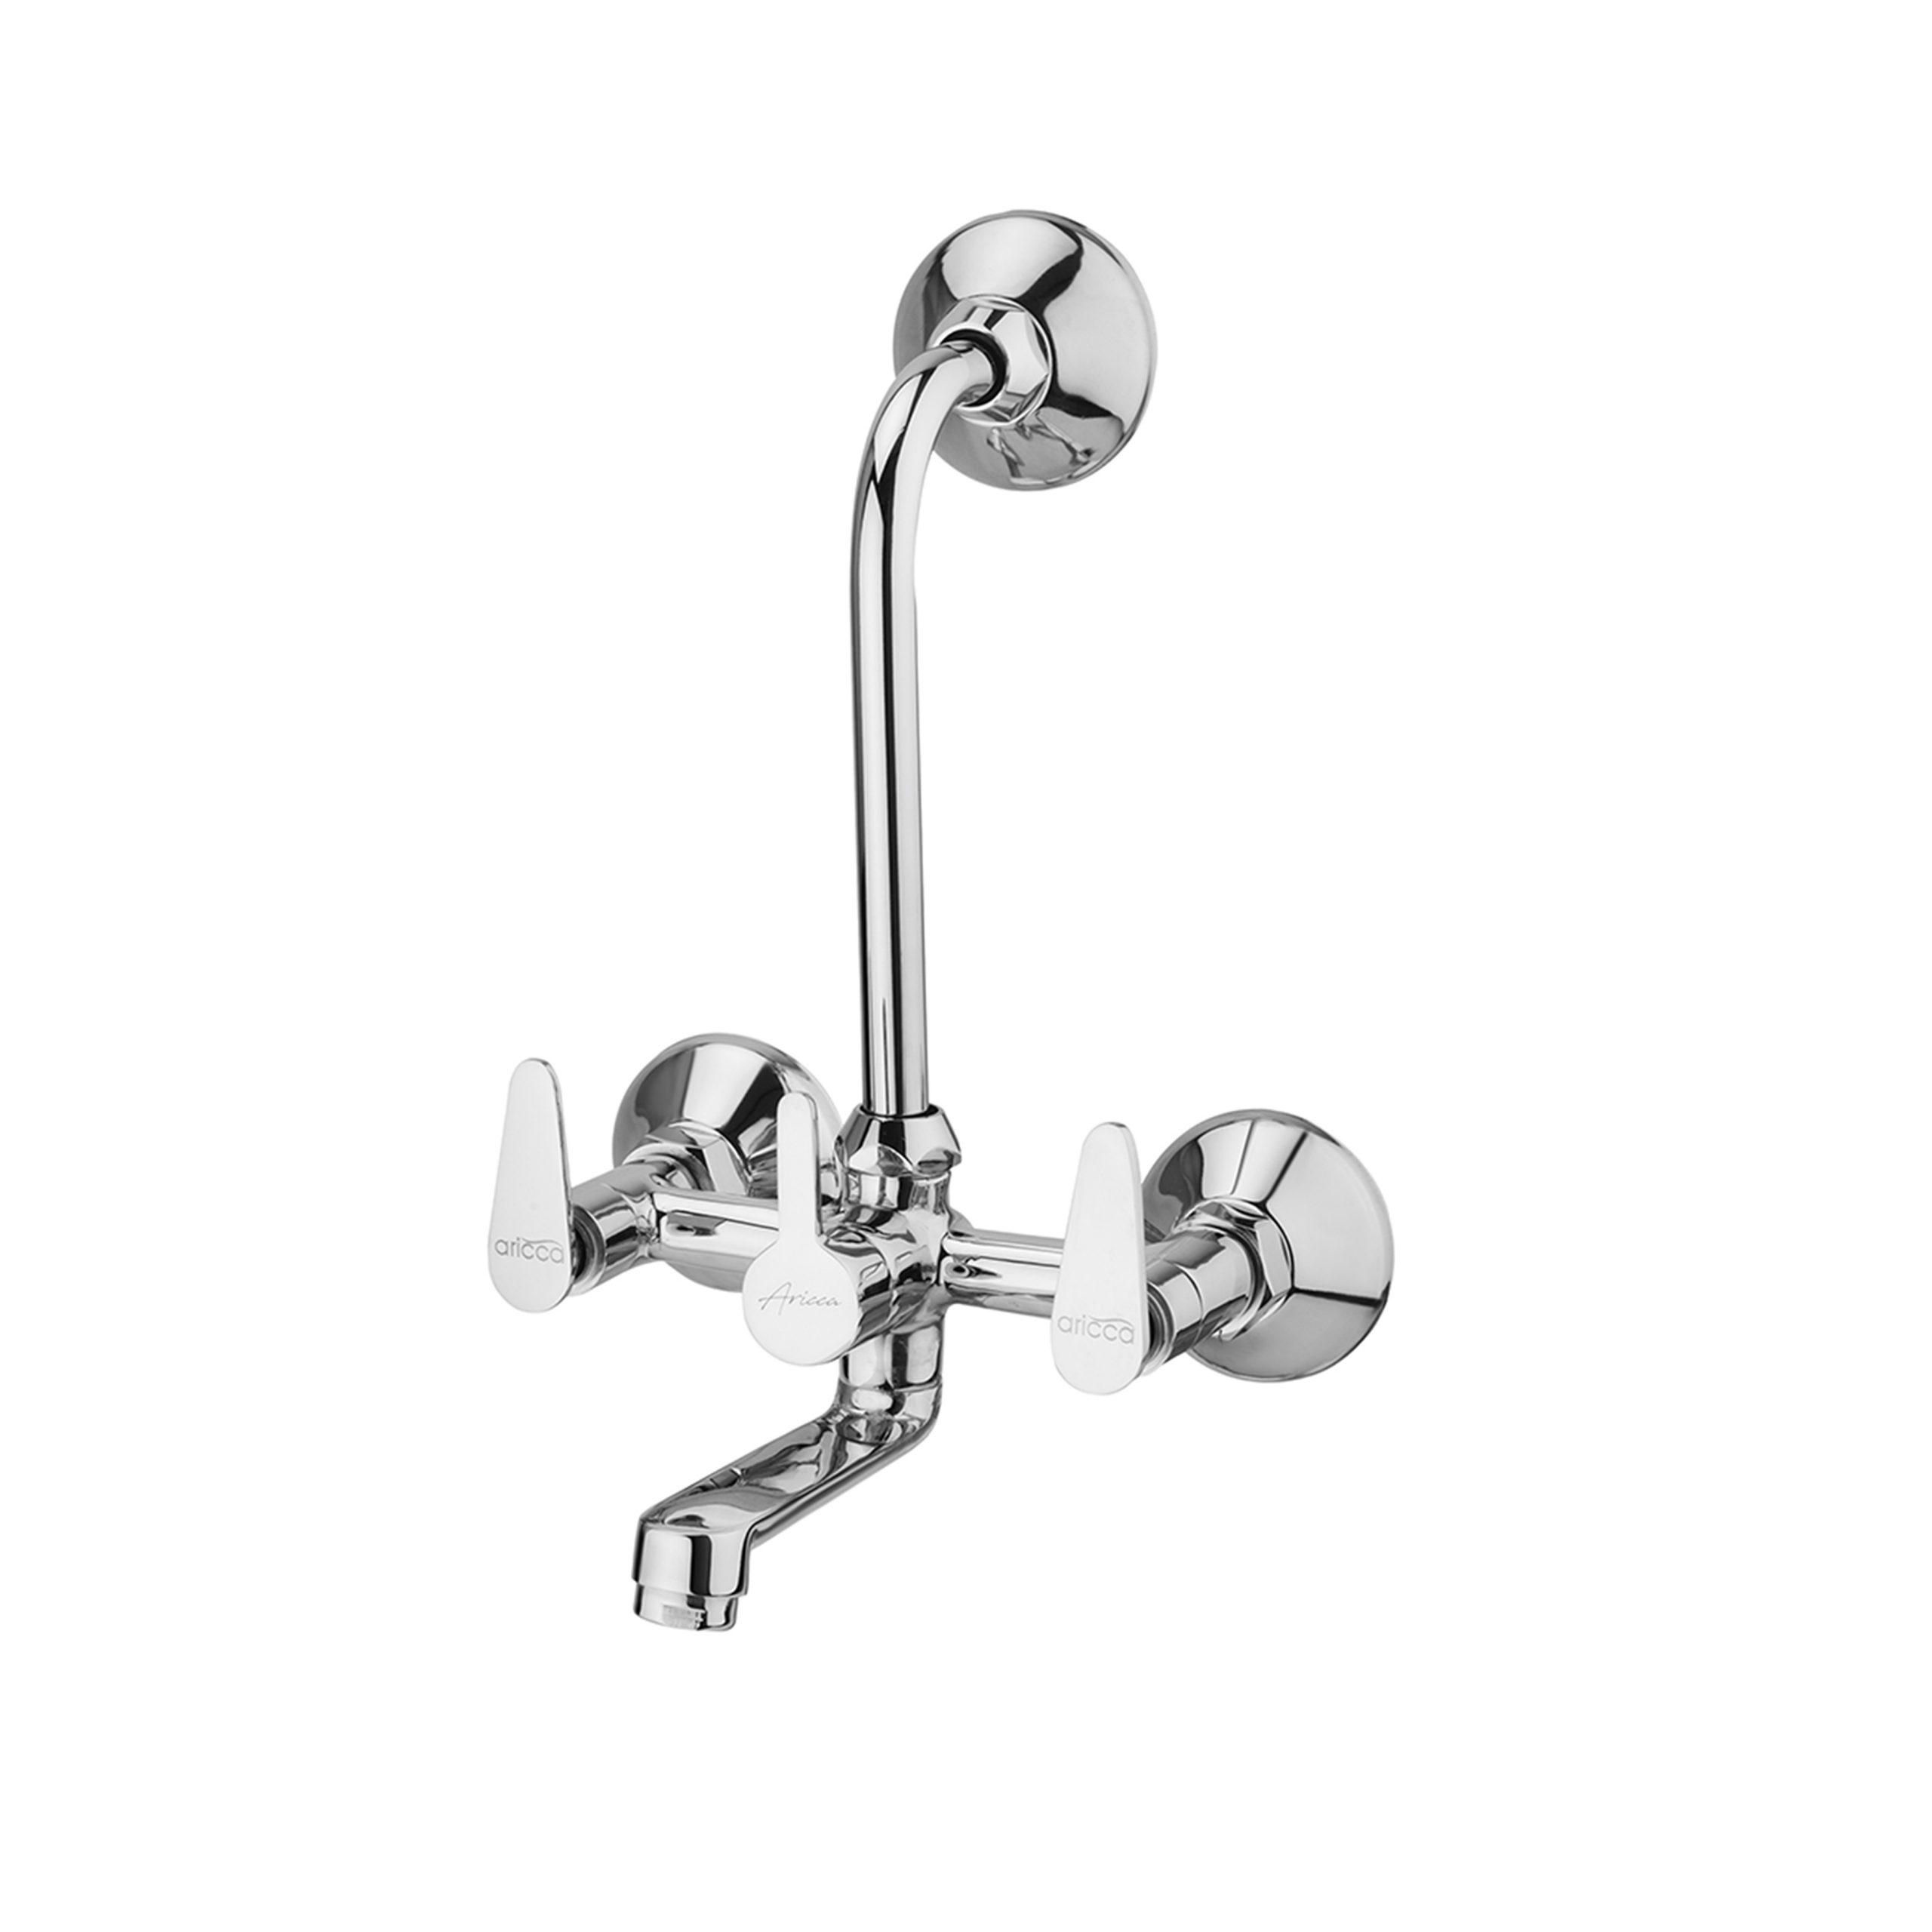 ABR 413-WALL MIXER WITH L-BAND